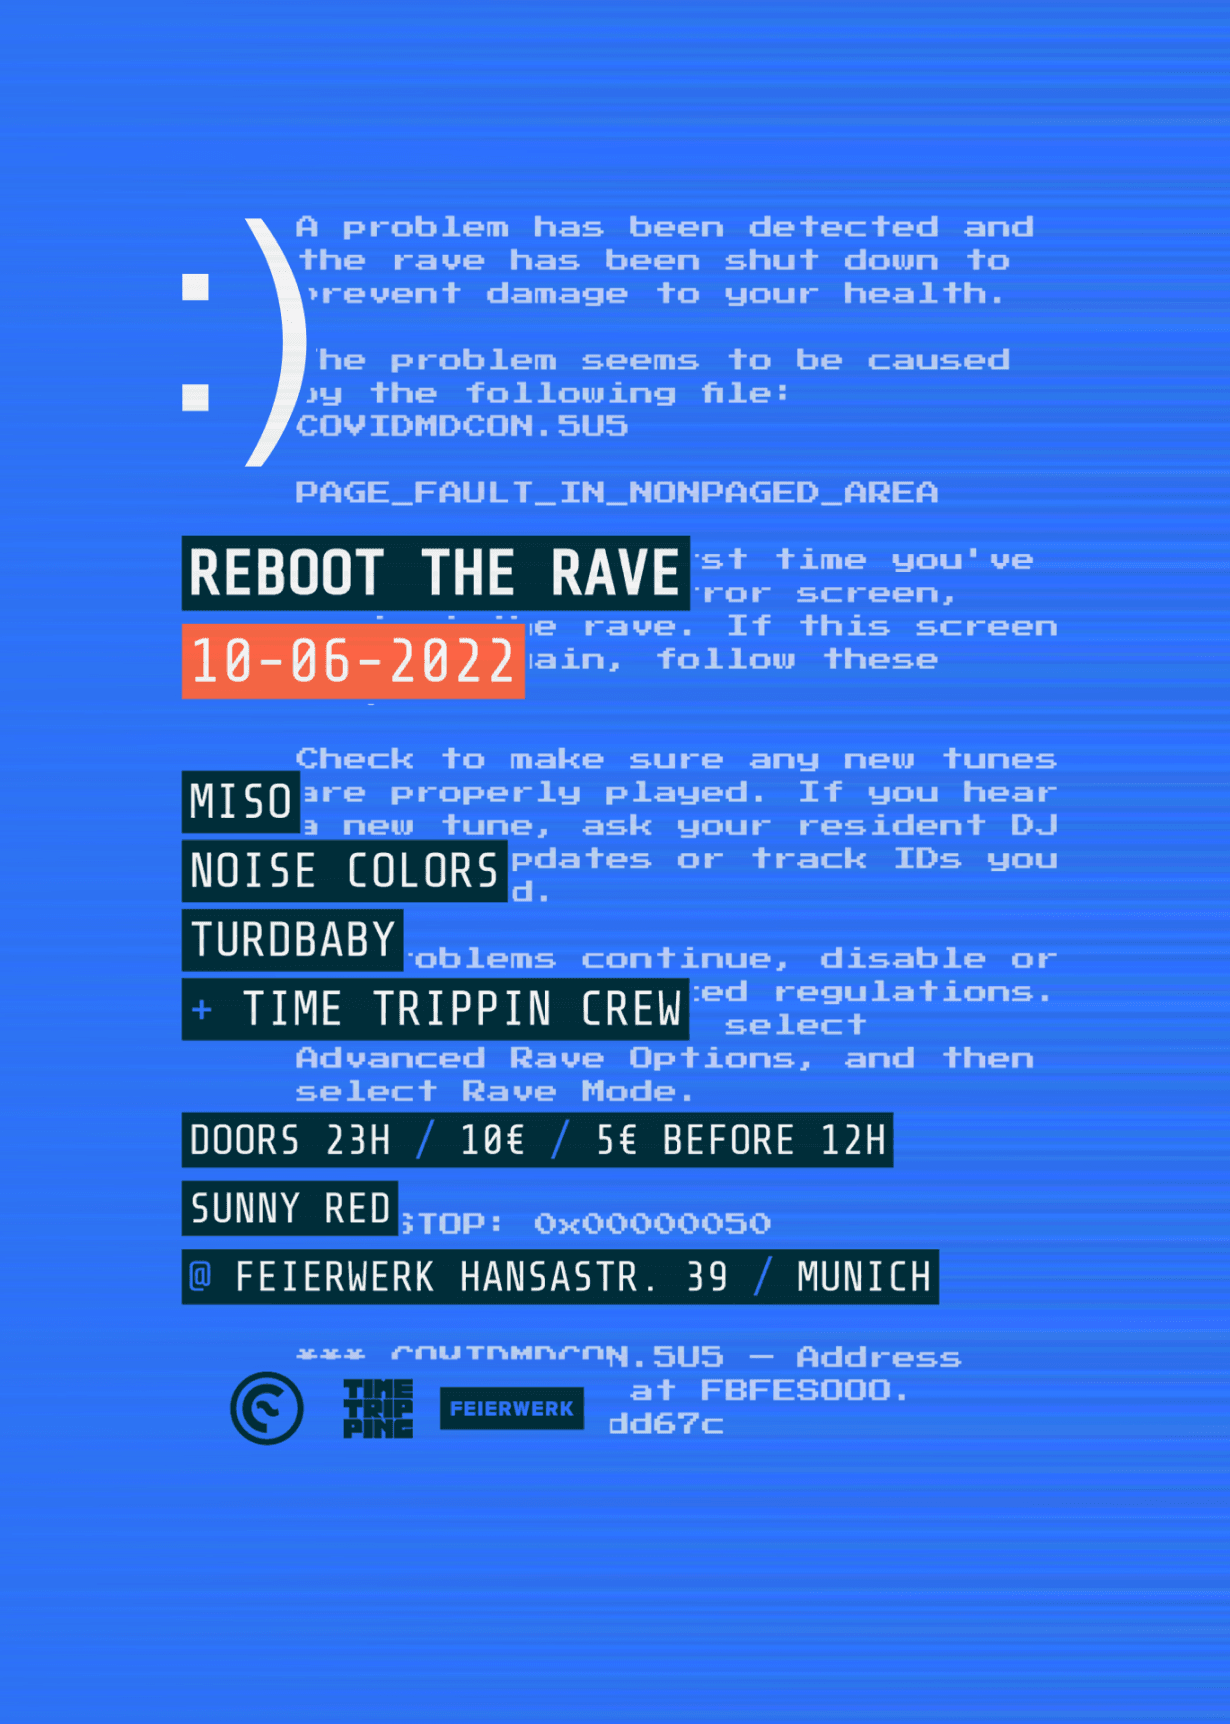 Reboot the Rave